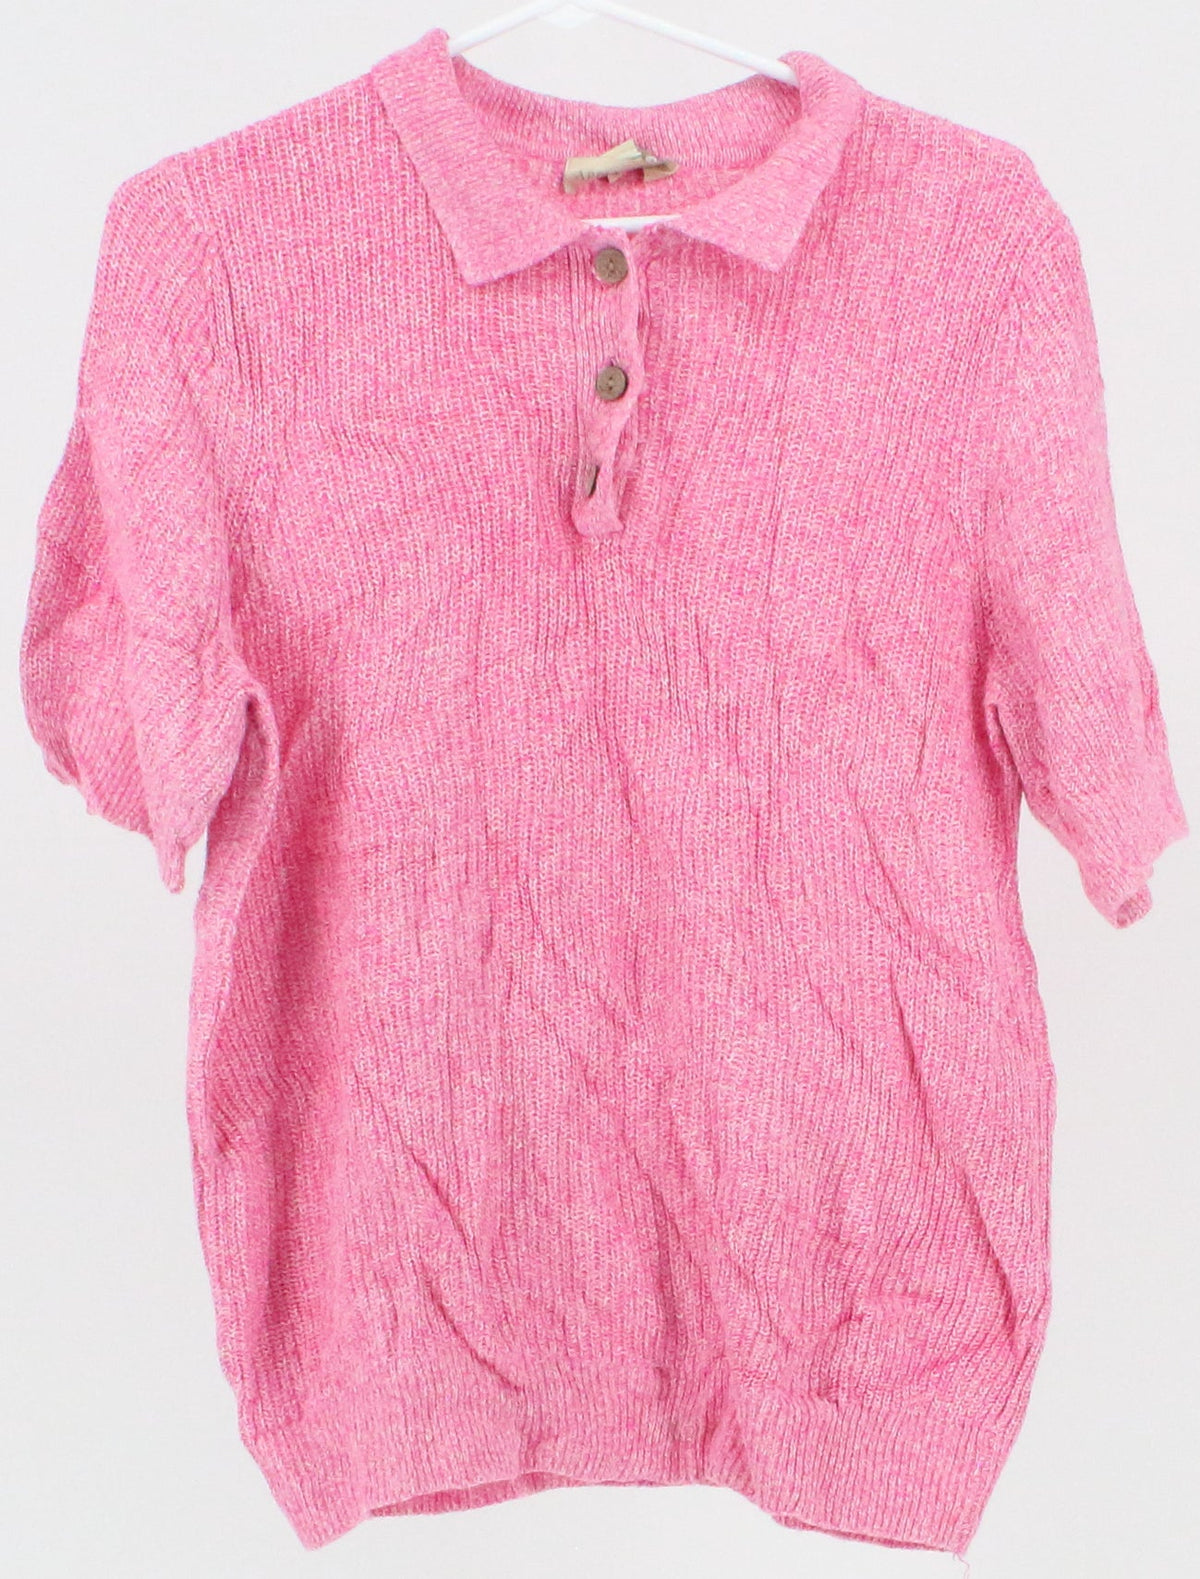 Appleseed's Pink Short Sleeve Polo Sweater